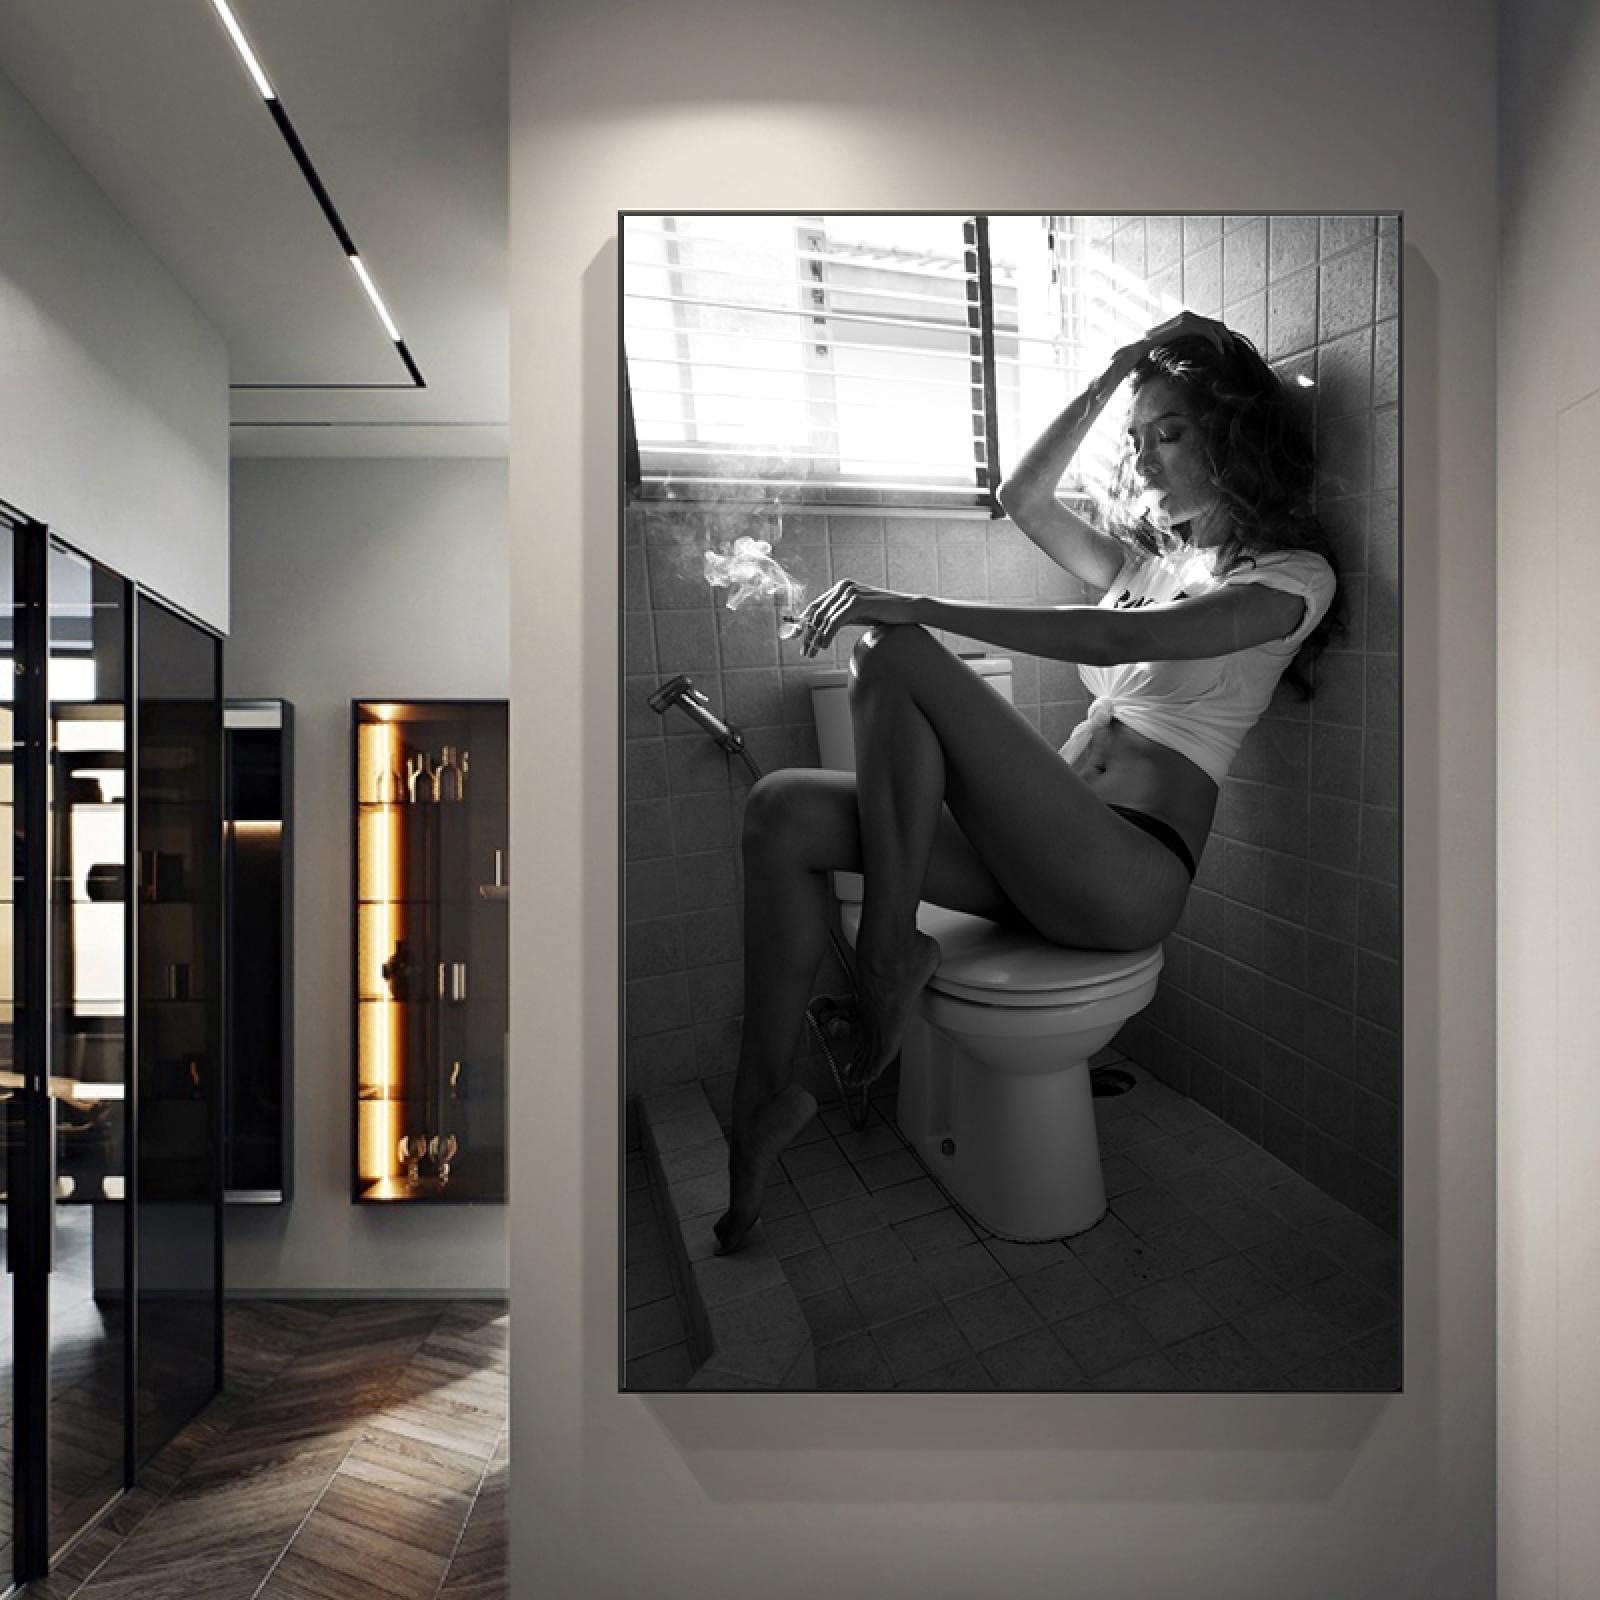 dana demont recommends sexy girl on toilet pic